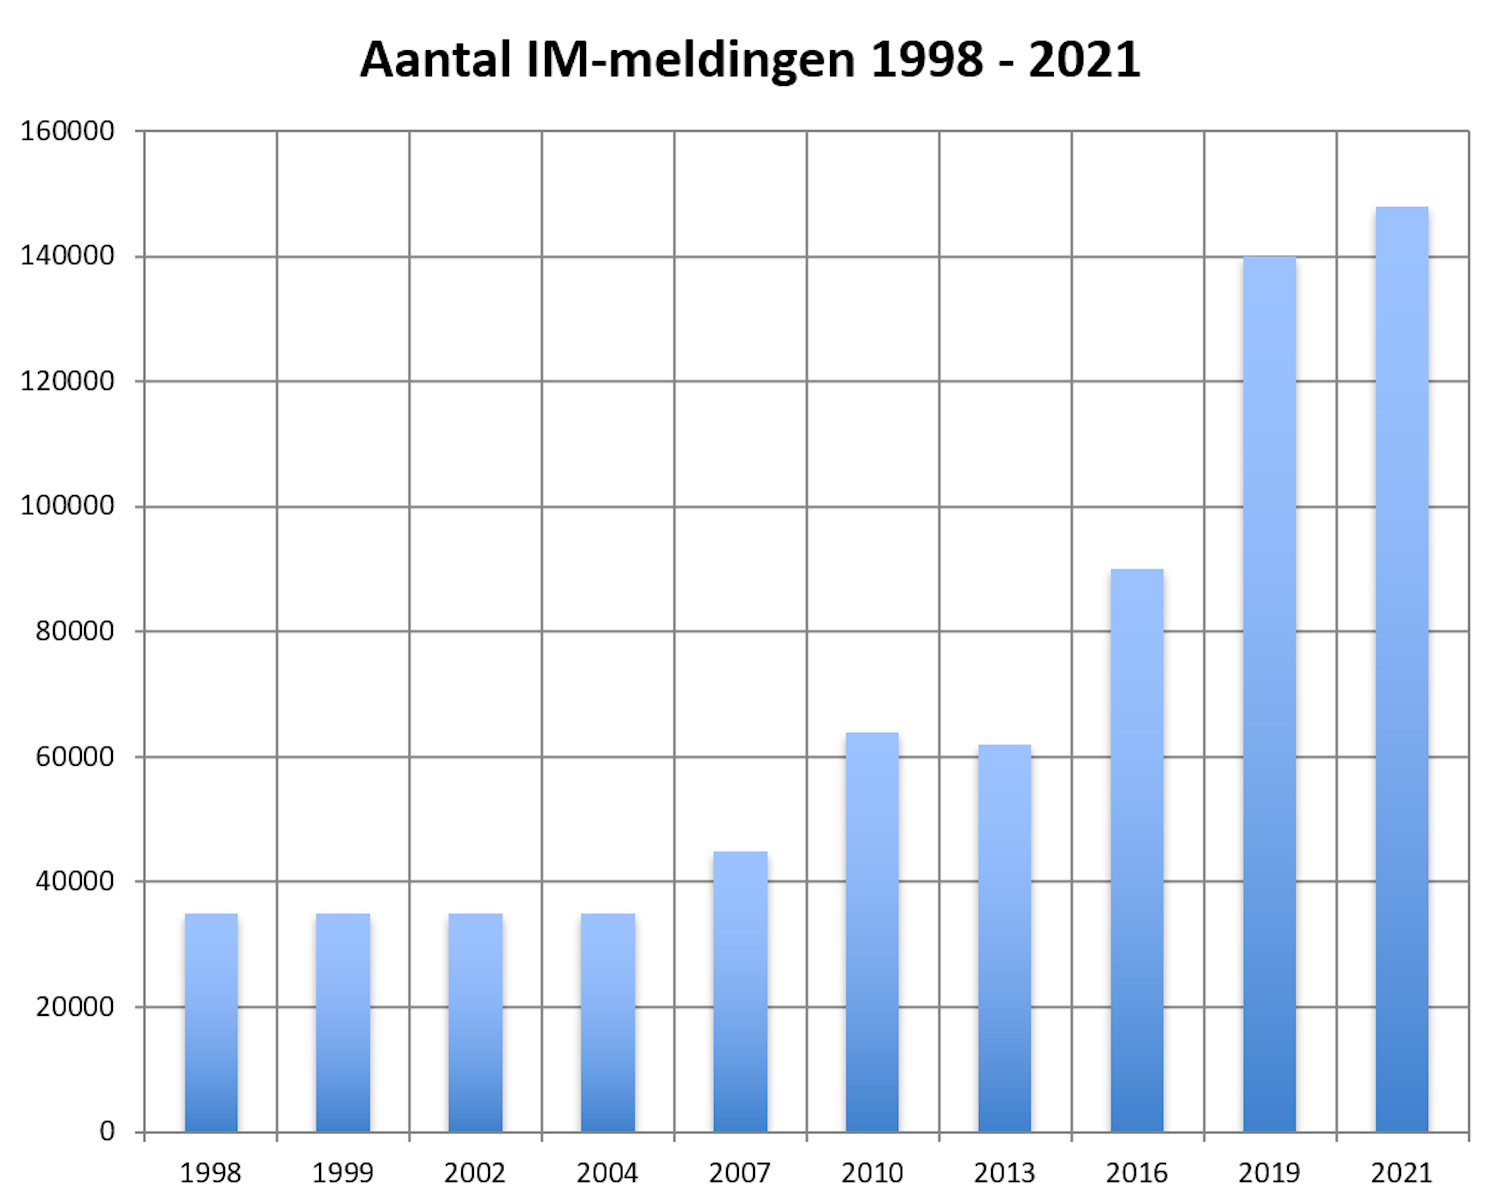 Number of IM recovery reports, 1998-2021